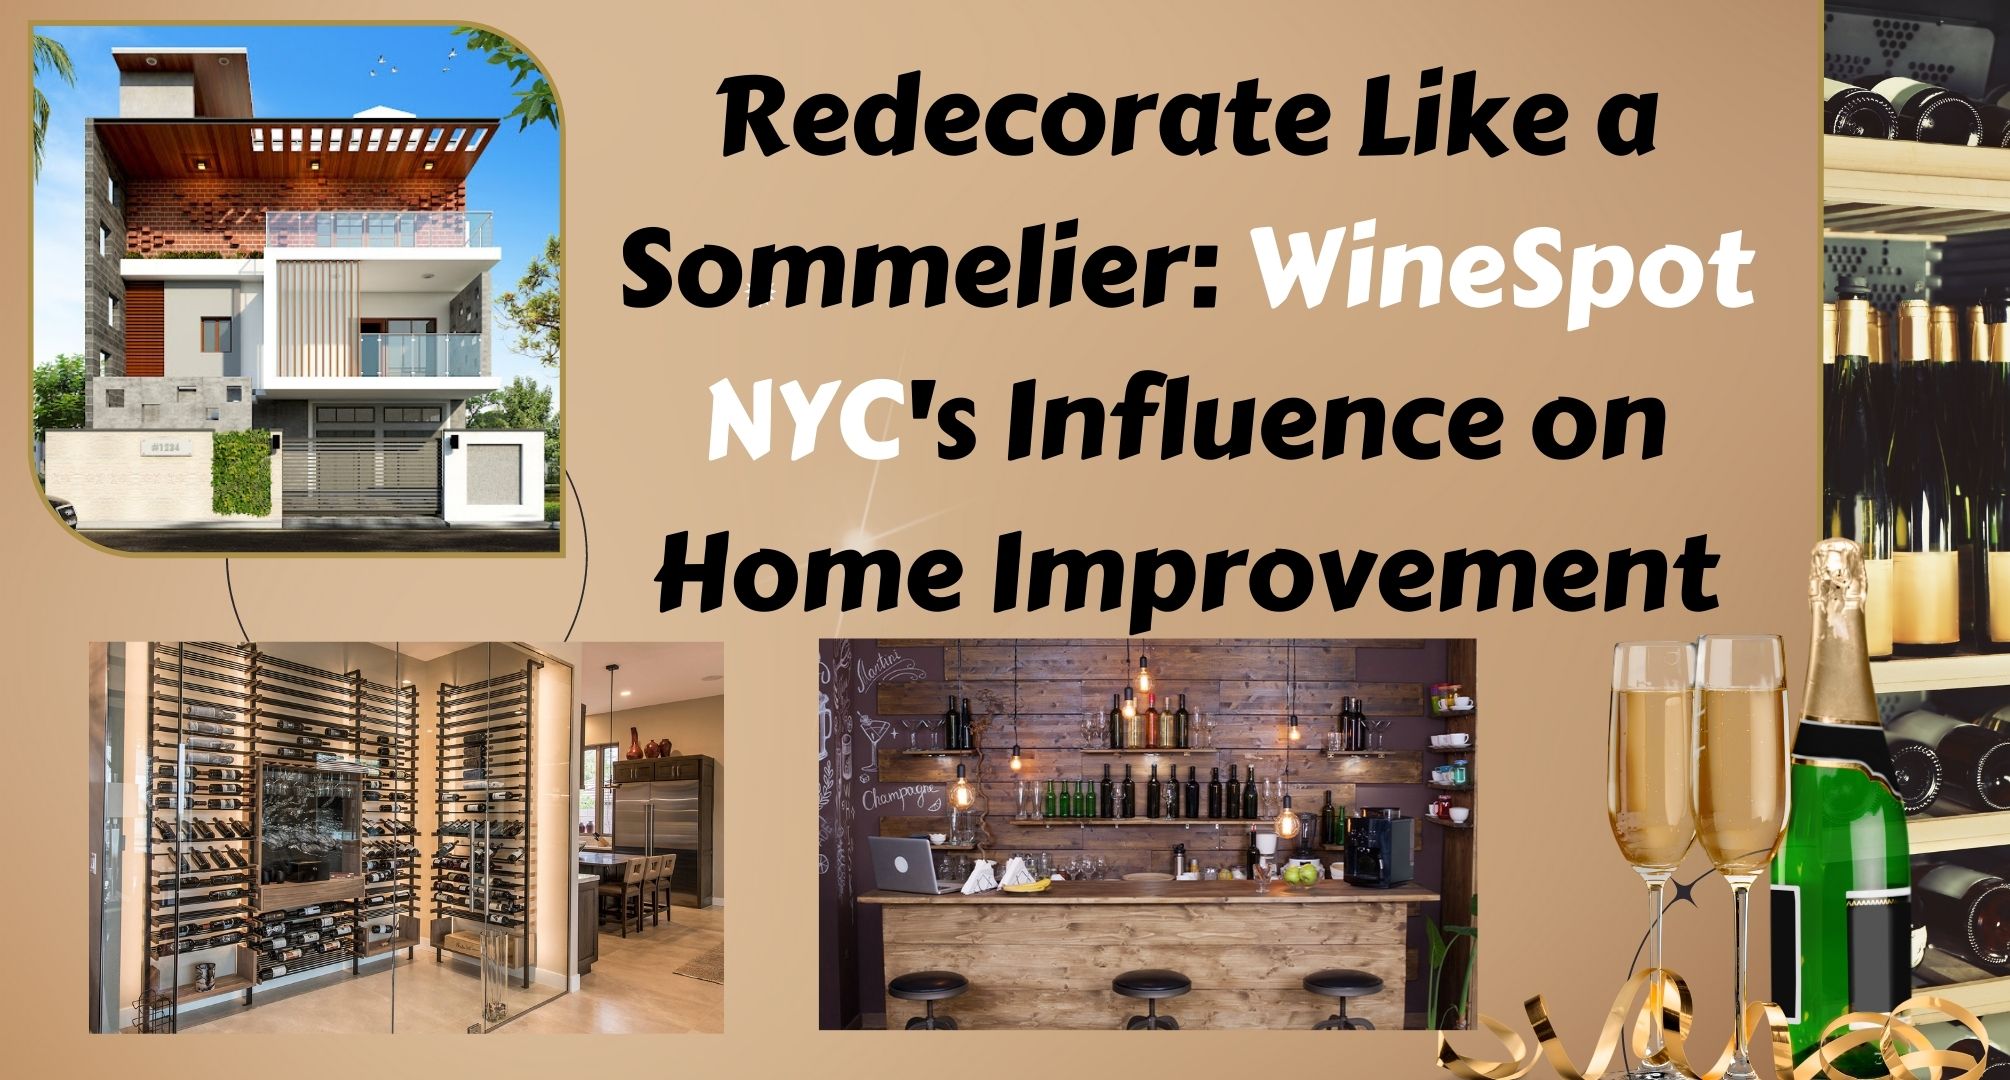 Redecorate Like a Sommelier WineSpot NYC's Influence on Home Improvement